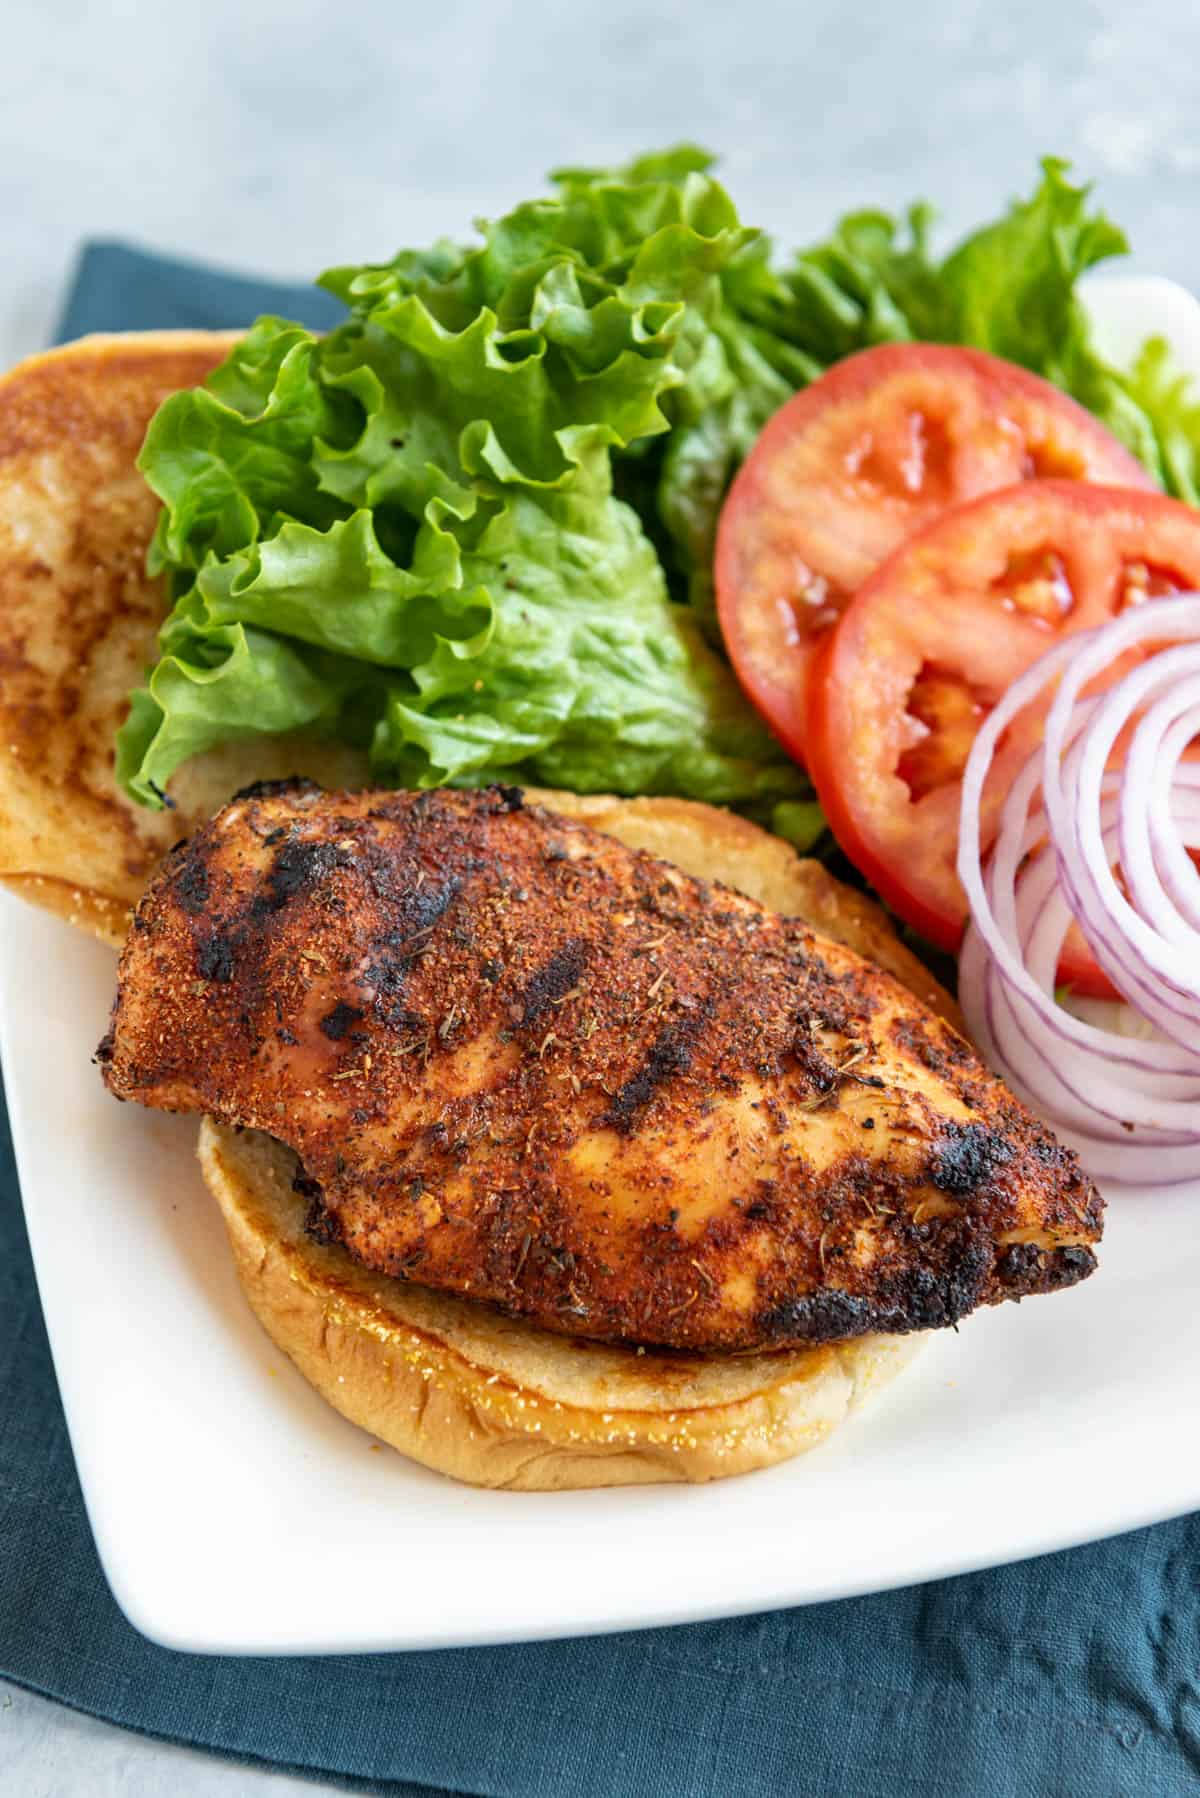 Grilled Cajun chicken on a burger bun with lettuce tomatoes and sliced red onions.